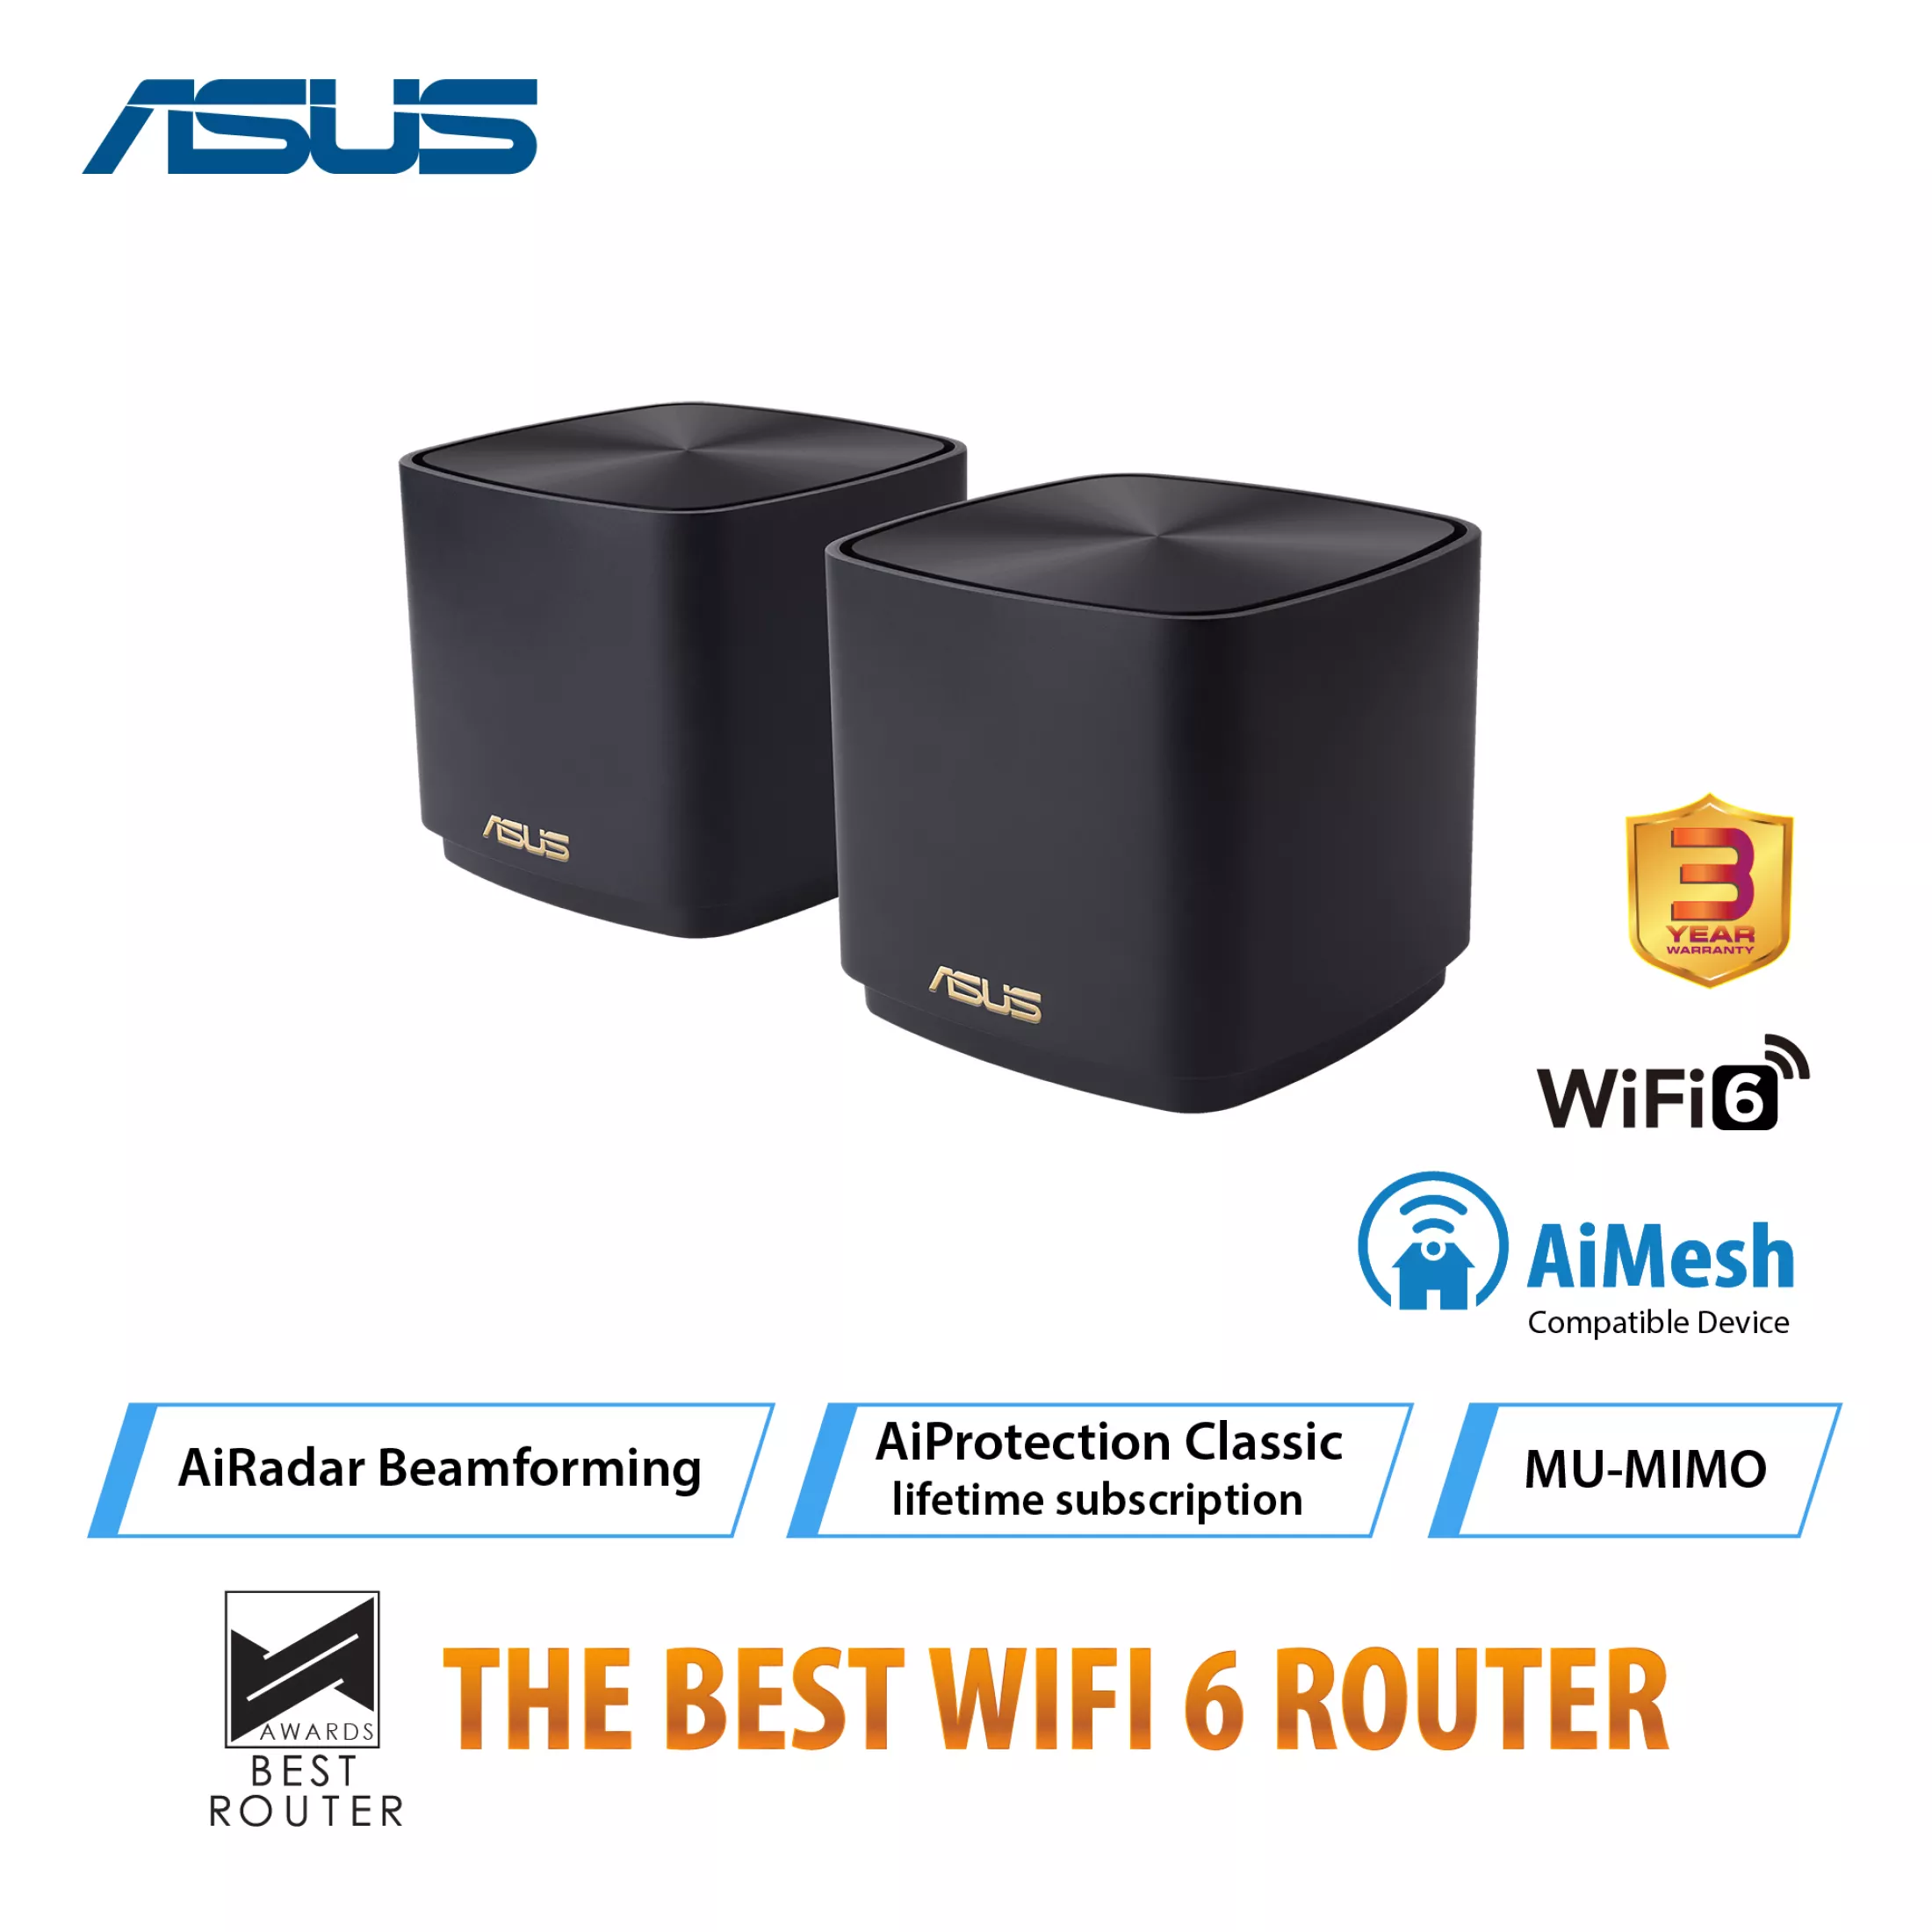 ASUS ZenWiFi AX Mini Mesh WiFi 6 System 2-PACK, Black (AX1800 XD4 2PK) - Whole Home Coverage up to 4800 sq.ft & 5+ rooms, AiMesh, Included Lifetime Internet Security, Easy Setup, Parental Control